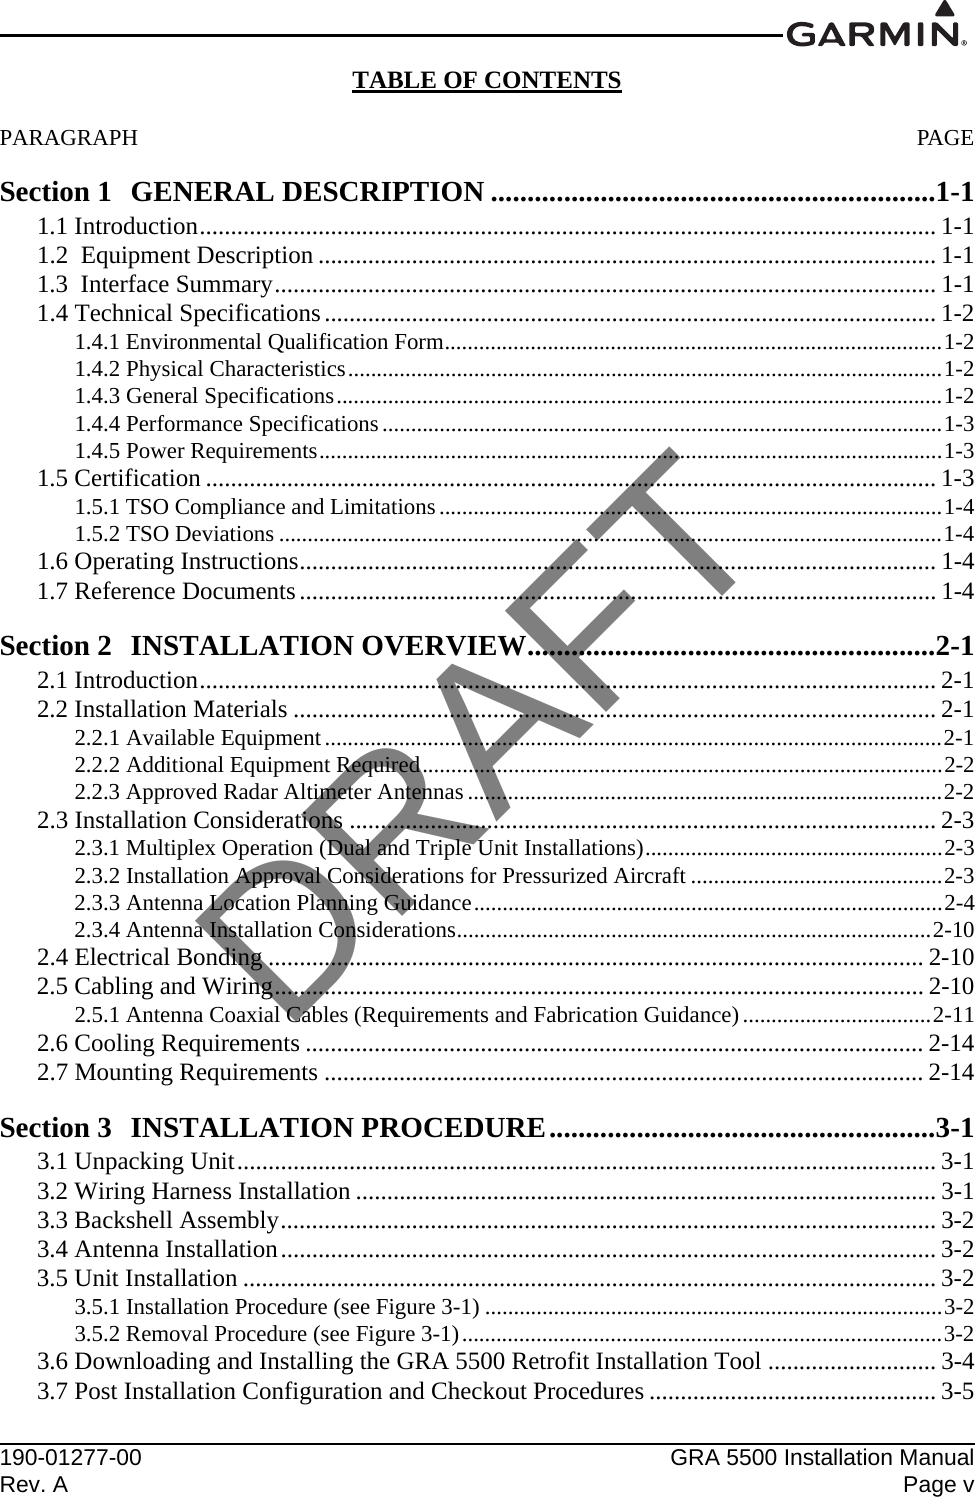 190-01277-00 GRA 5500 Installation ManualRev. A Page vTABLE OF CONTENTSPARAGRAPH PAGESection 1 GENERAL DESCRIPTION .............................................................1-11.1 Introduction...................................................................................................................... 1-11.2  Equipment Description ................................................................................................... 1-11.3  Interface Summary..........................................................................................................1-11.4 Technical Specifications.................................................................................................. 1-21.4.1 Environmental Qualification Form.......................................................................................1-21.4.2 Physical Characteristics........................................................................................................1-21.4.3 General Specifications..........................................................................................................1-21.4.4 Performance Specifications..................................................................................................1-31.4.5 Power Requirements.............................................................................................................1-31.5 Certification ..................................................................................................................... 1-31.5.1 TSO Compliance and Limitations........................................................................................1-41.5.2 TSO Deviations ....................................................................................................................1-41.6 Operating Instructions......................................................................................................1-41.7 Reference Documents...................................................................................................... 1-4Section 2 INSTALLATION OVERVIEW........................................................2-12.1 Introduction...................................................................................................................... 2-12.2 Installation Materials ....................................................................................................... 2-12.2.1 Available Equipment............................................................................................................2-12.2.2 Additional Equipment Required...........................................................................................2-22.2.3 Approved Radar Altimeter Antennas ...................................................................................2-22.3 Installation Considerations .............................................................................................. 2-32.3.1 Multiplex Operation (Dual and Triple Unit Installations)....................................................2-32.3.2 Installation Approval Considerations for Pressurized Aircraft ............................................2-32.3.3 Antenna Location Planning Guidance..................................................................................2-42.3.4 Antenna Installation Considerations...................................................................................2-102.4 Electrical Bonding ......................................................................................................... 2-102.5 Cabling and Wiring........................................................................................................ 2-102.5.1 Antenna Coaxial Cables (Requirements and Fabrication Guidance).................................2-112.6 Cooling Requirements ................................................................................................... 2-142.7 Mounting Requirements ................................................................................................ 2-14Section 3 INSTALLATION PROCEDURE.....................................................3-13.1 Unpacking Unit................................................................................................................ 3-13.2 Wiring Harness Installation ............................................................................................. 3-13.3 Backshell Assembly......................................................................................................... 3-23.4 Antenna Installation......................................................................................................... 3-23.5 Unit Installation ............................................................................................................... 3-23.5.1 Installation Procedure (see Figure 3-1) ................................................................................3-23.5.2 Removal Procedure (see Figure 3-1)....................................................................................3-23.6 Downloading and Installing the GRA 5500 Retrofit Installation Tool ........................... 3-43.7 Post Installation Configuration and Checkout Procedures .............................................. 3-5DRAFT